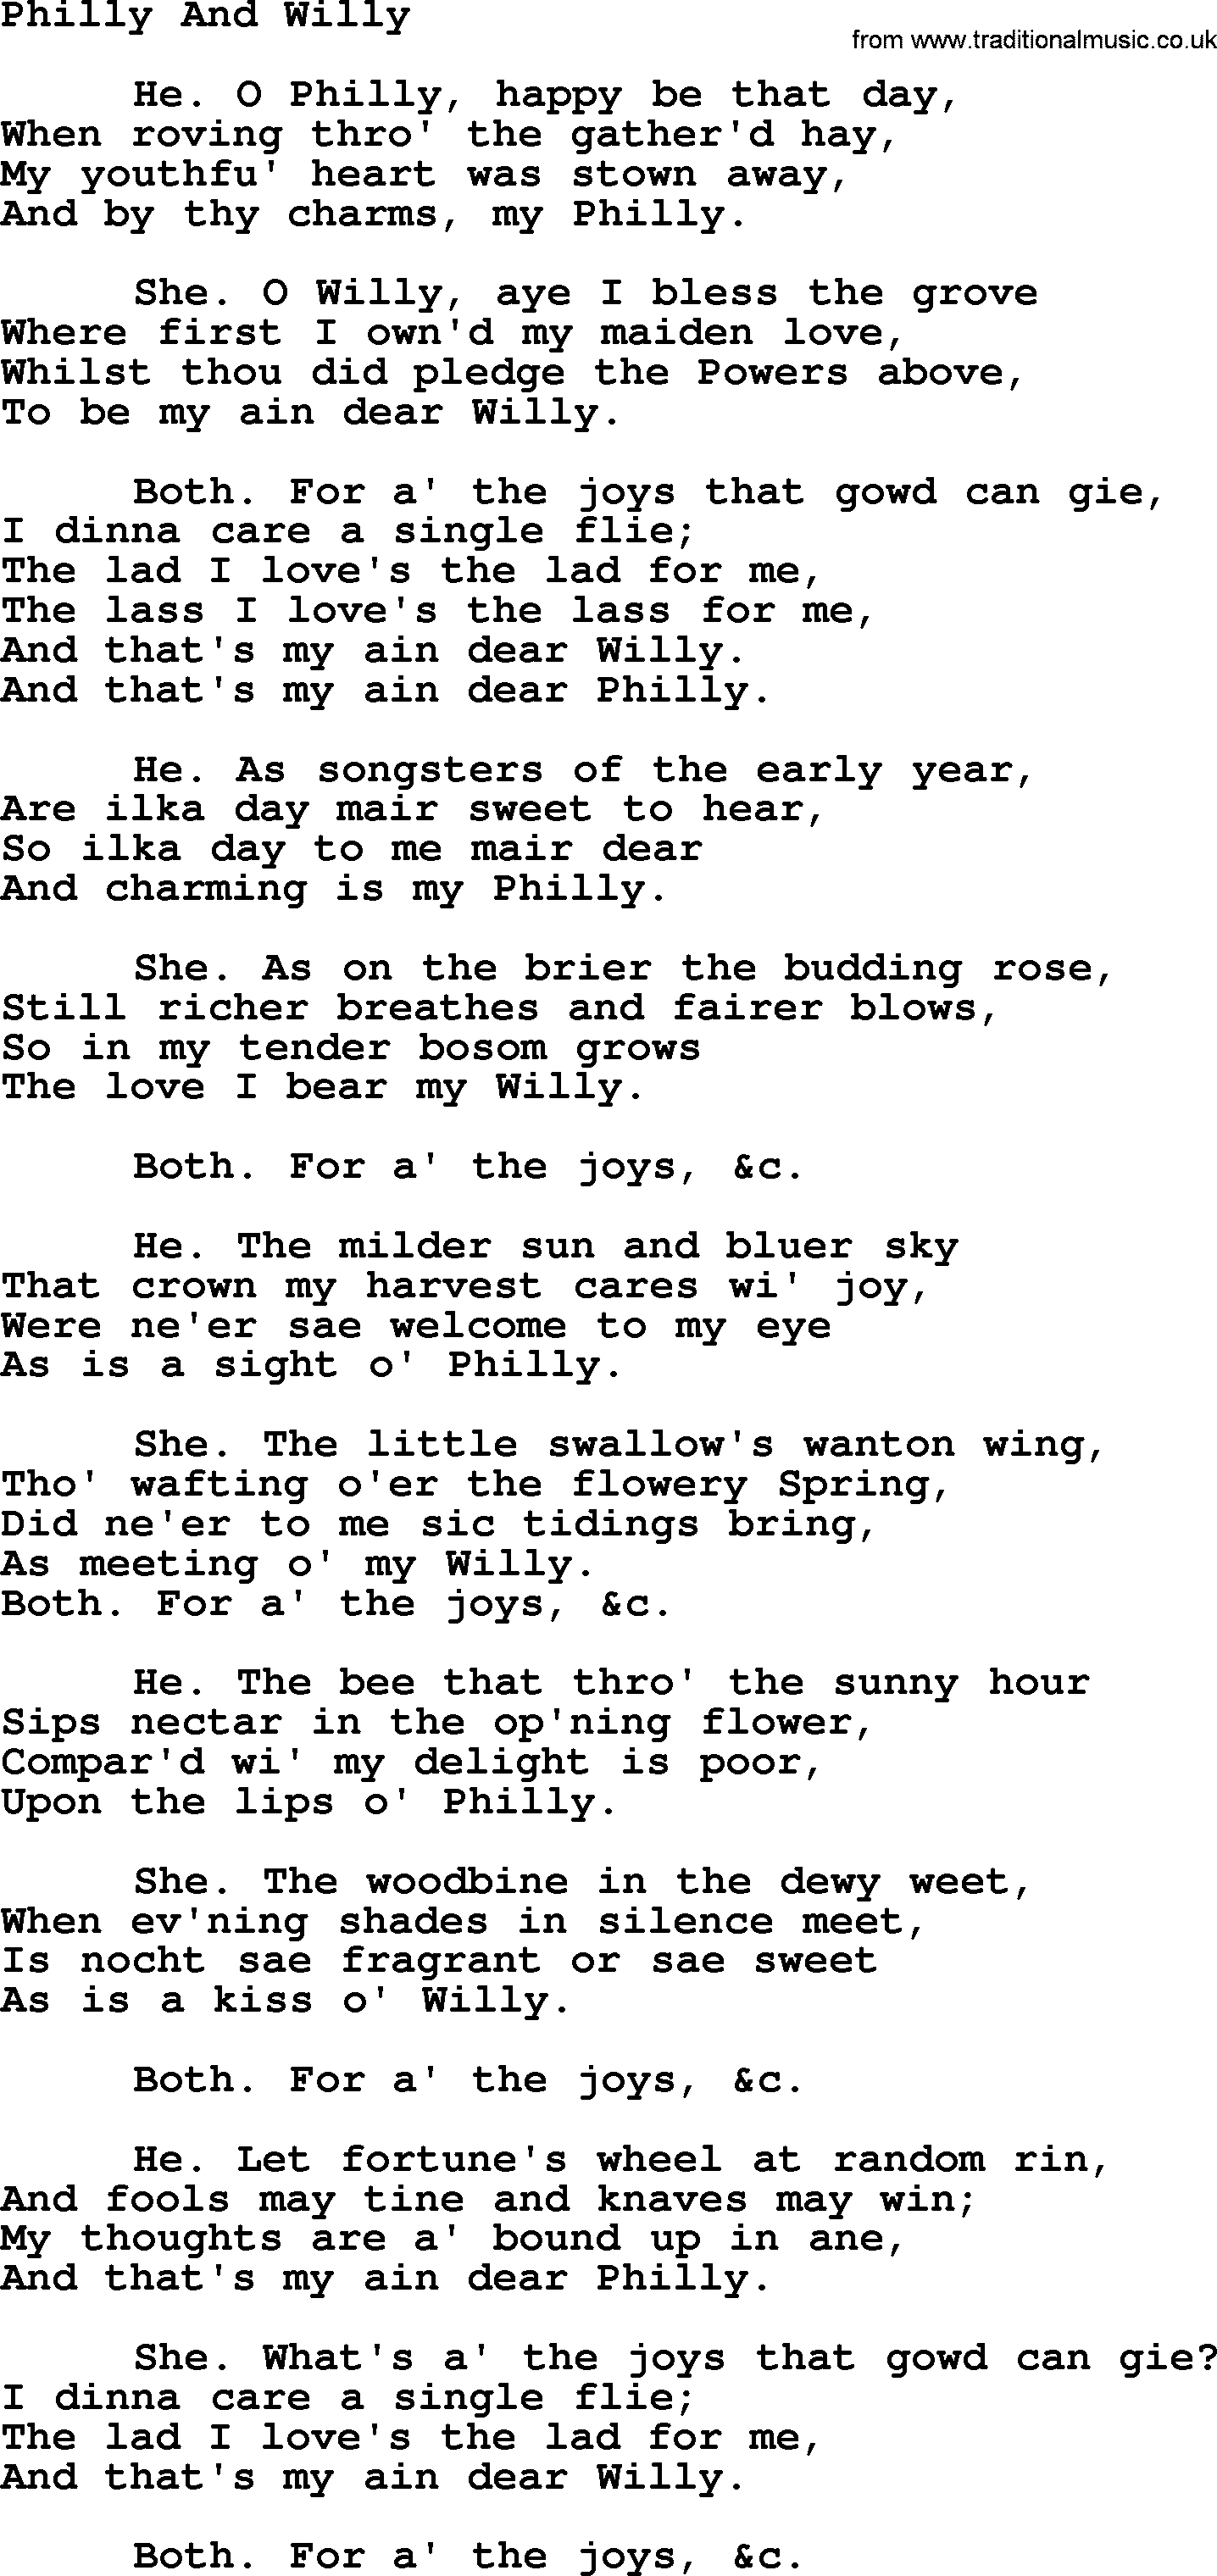 Robert Burns Songs & Lyrics: Philly And Willy